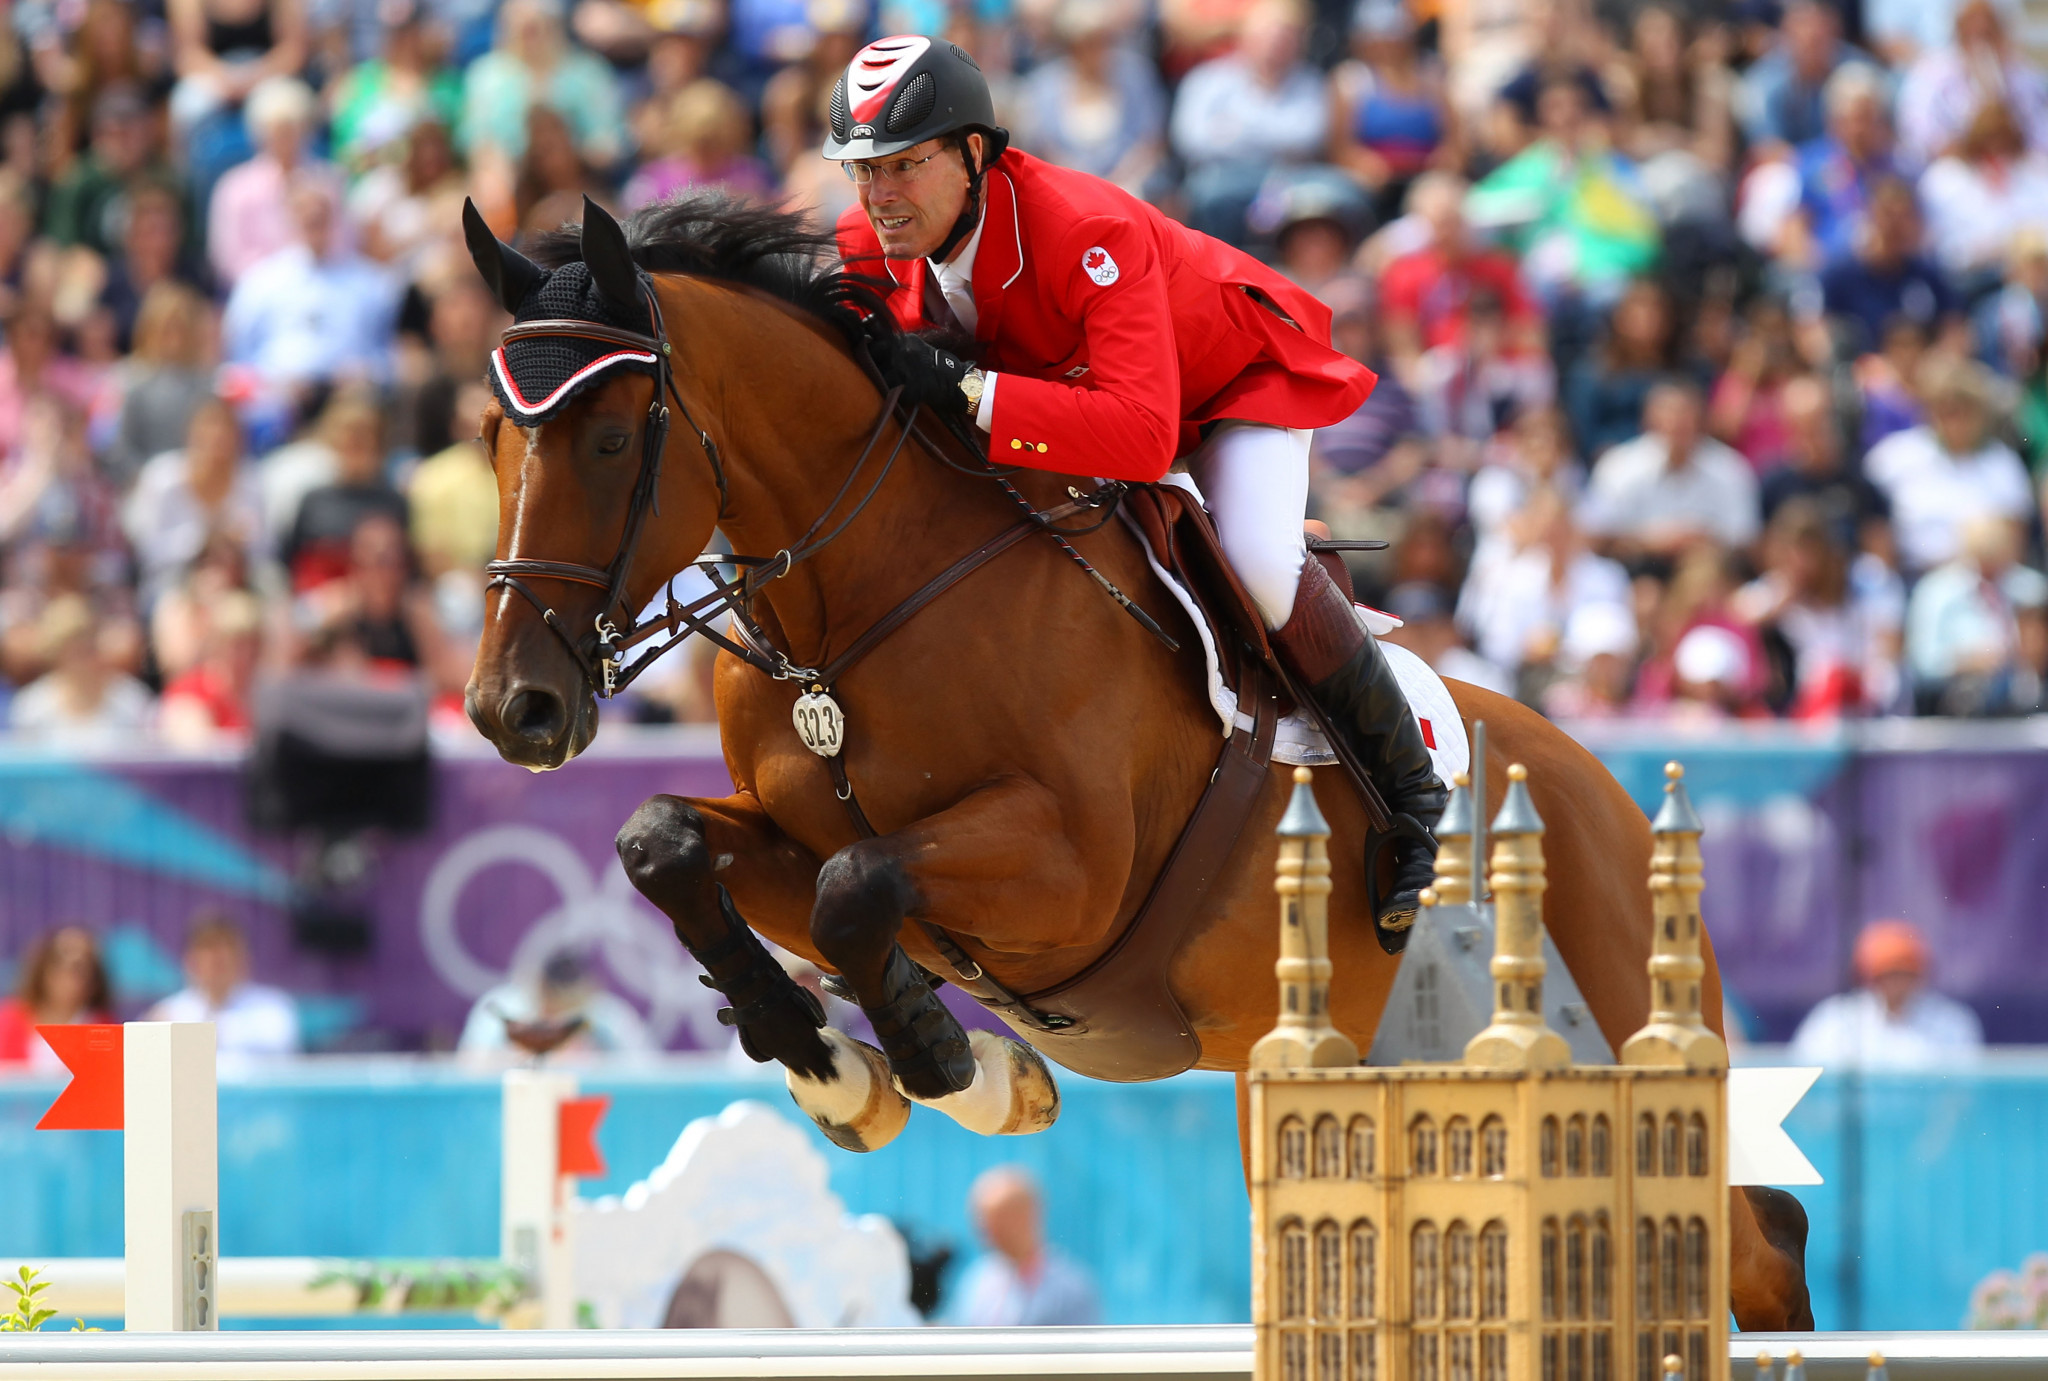 Ian Millar made history after competing at the London 2012 Olympic Games, becoming the only athlete to participate in 10 ©Getty Images